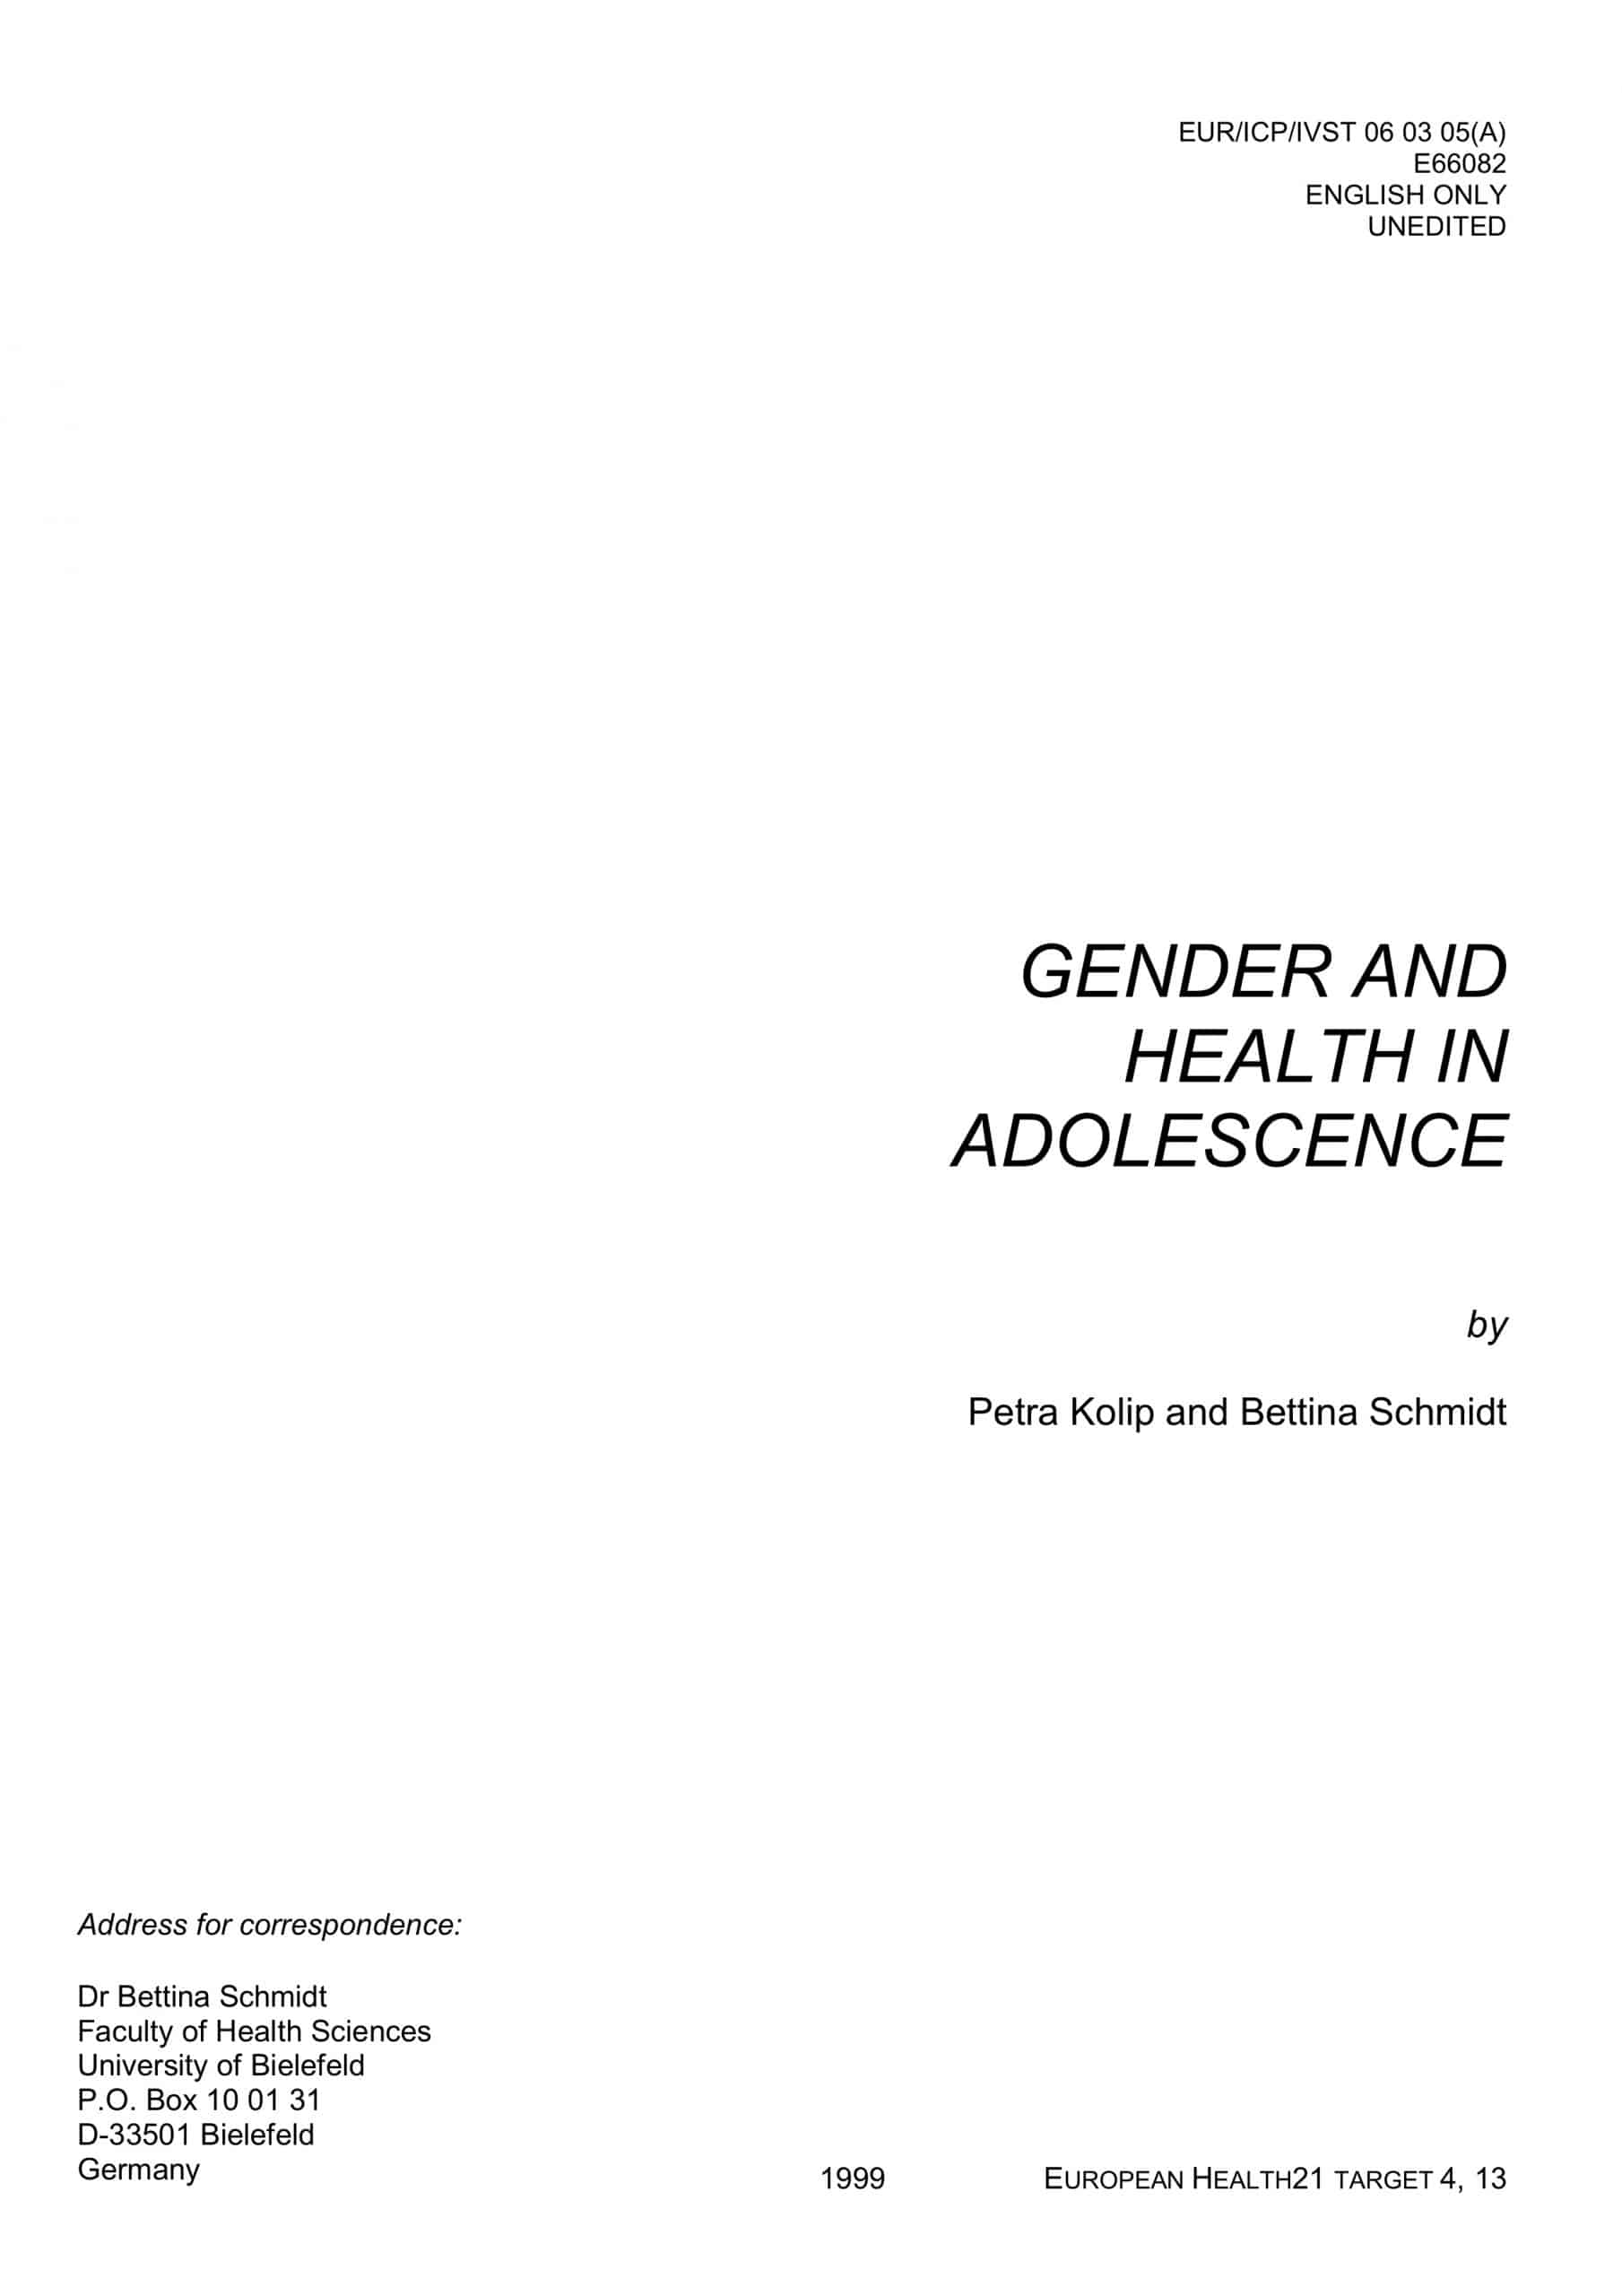 Gender and Health in Adolescence report cover